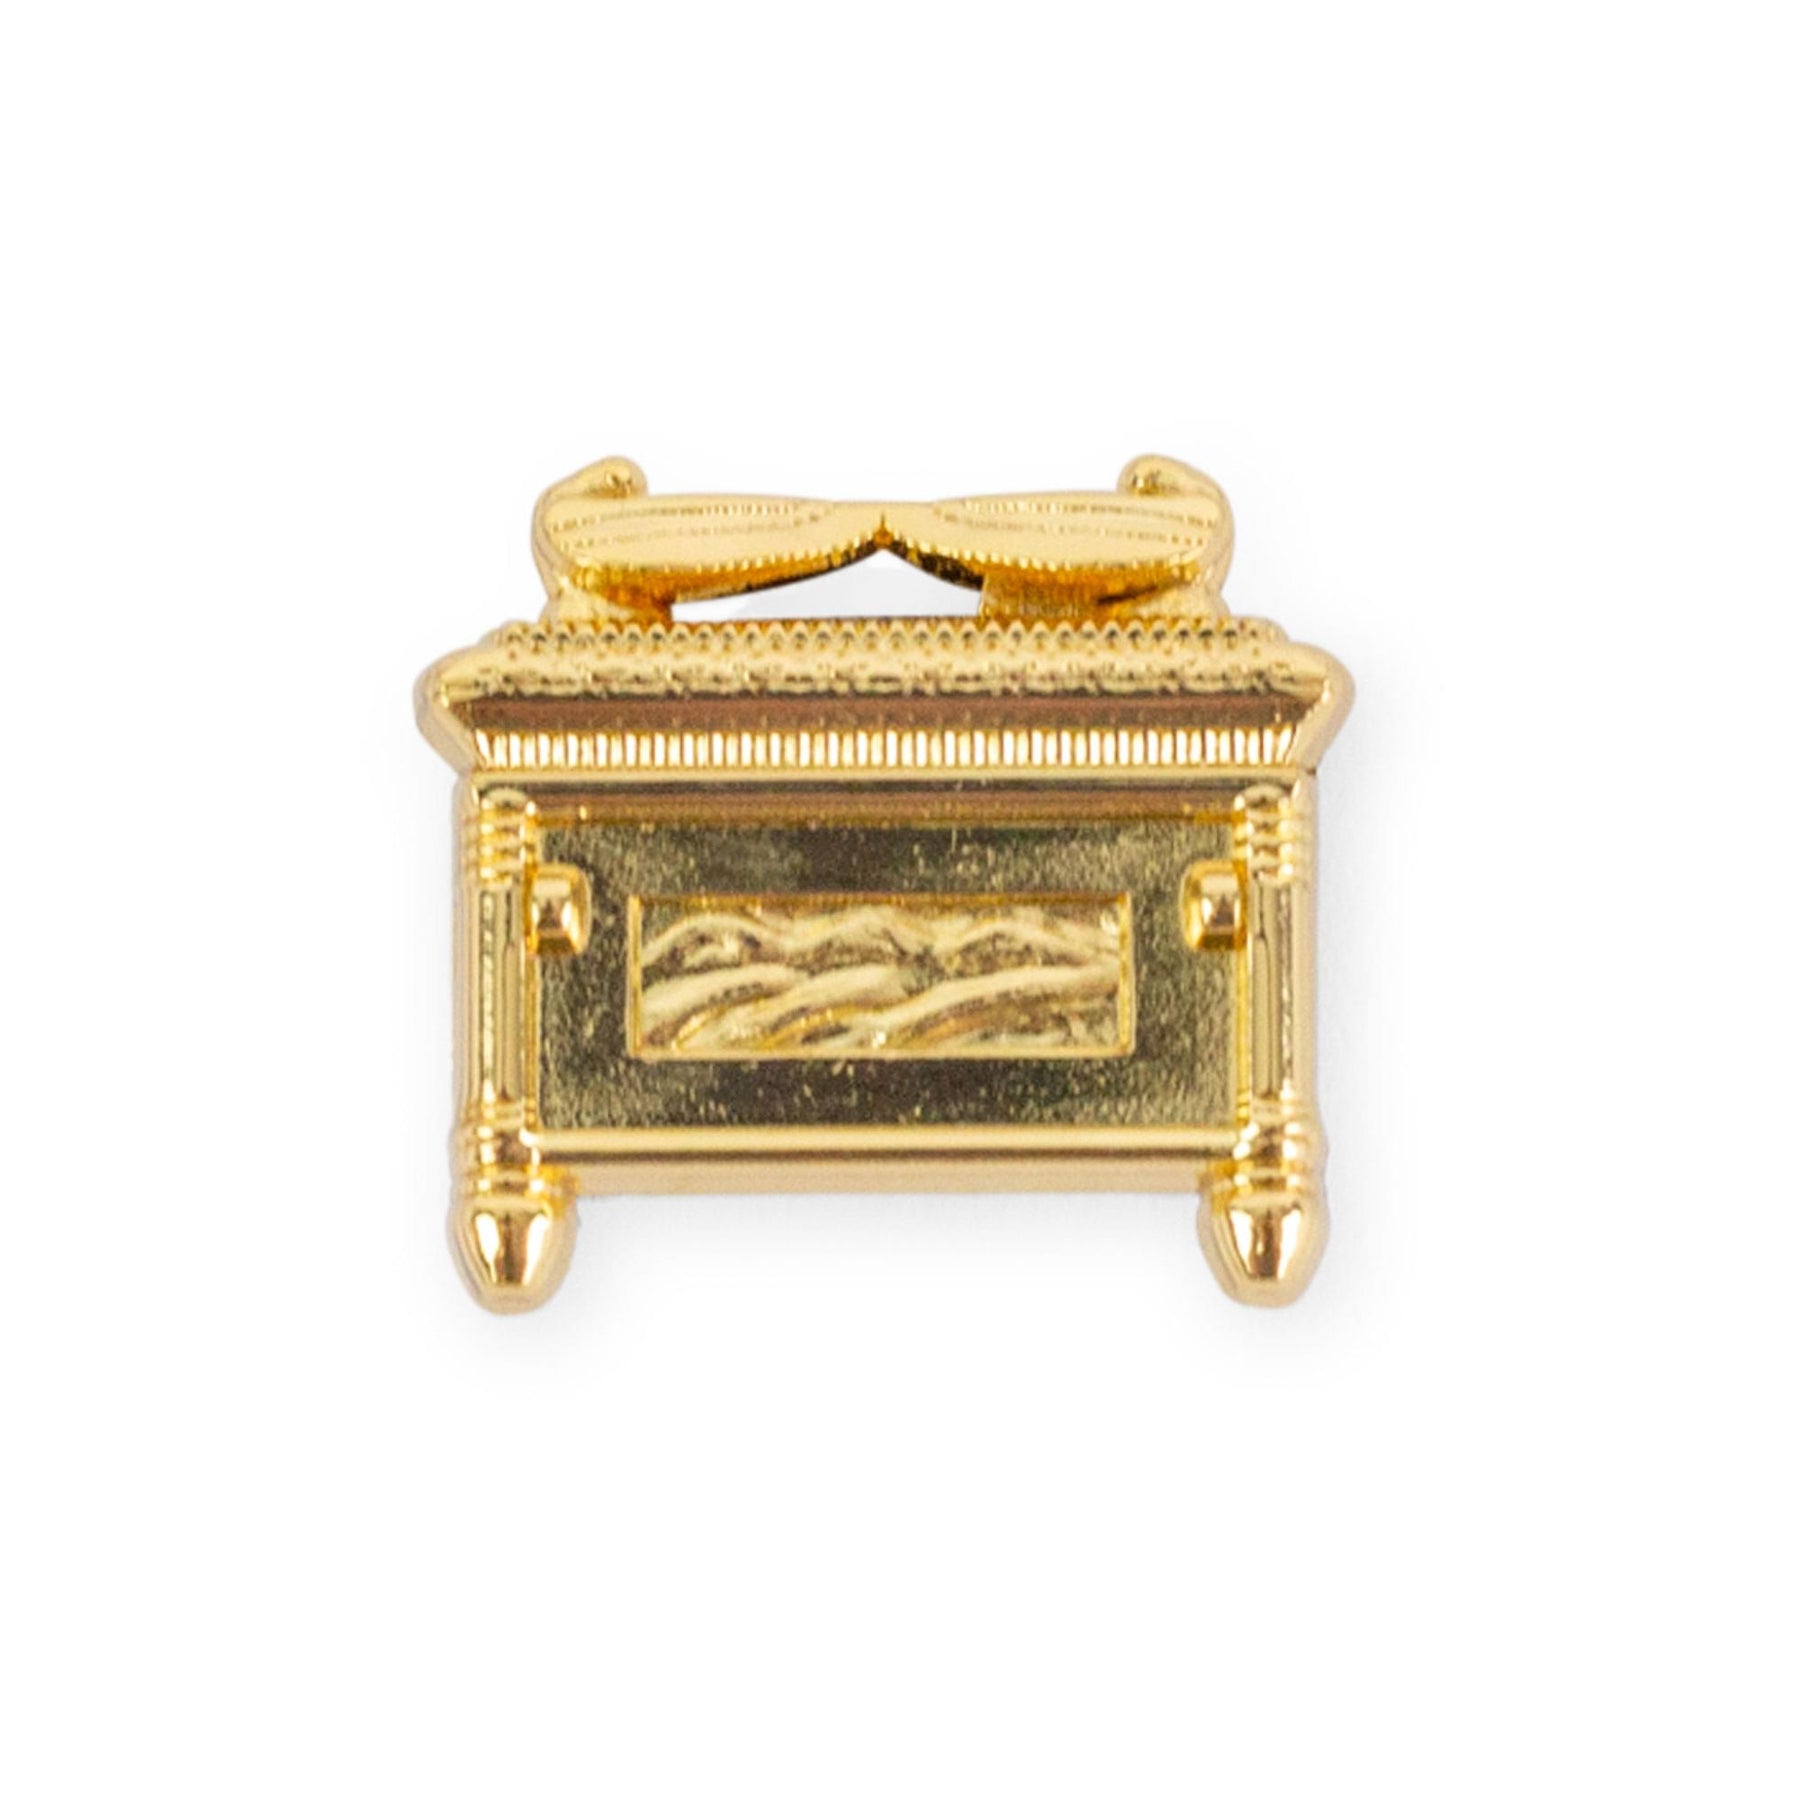 Indiana Jones Raiders of the Lost Ark, The Covenant Miniature Gold IP –  Jewelry Brands Shop